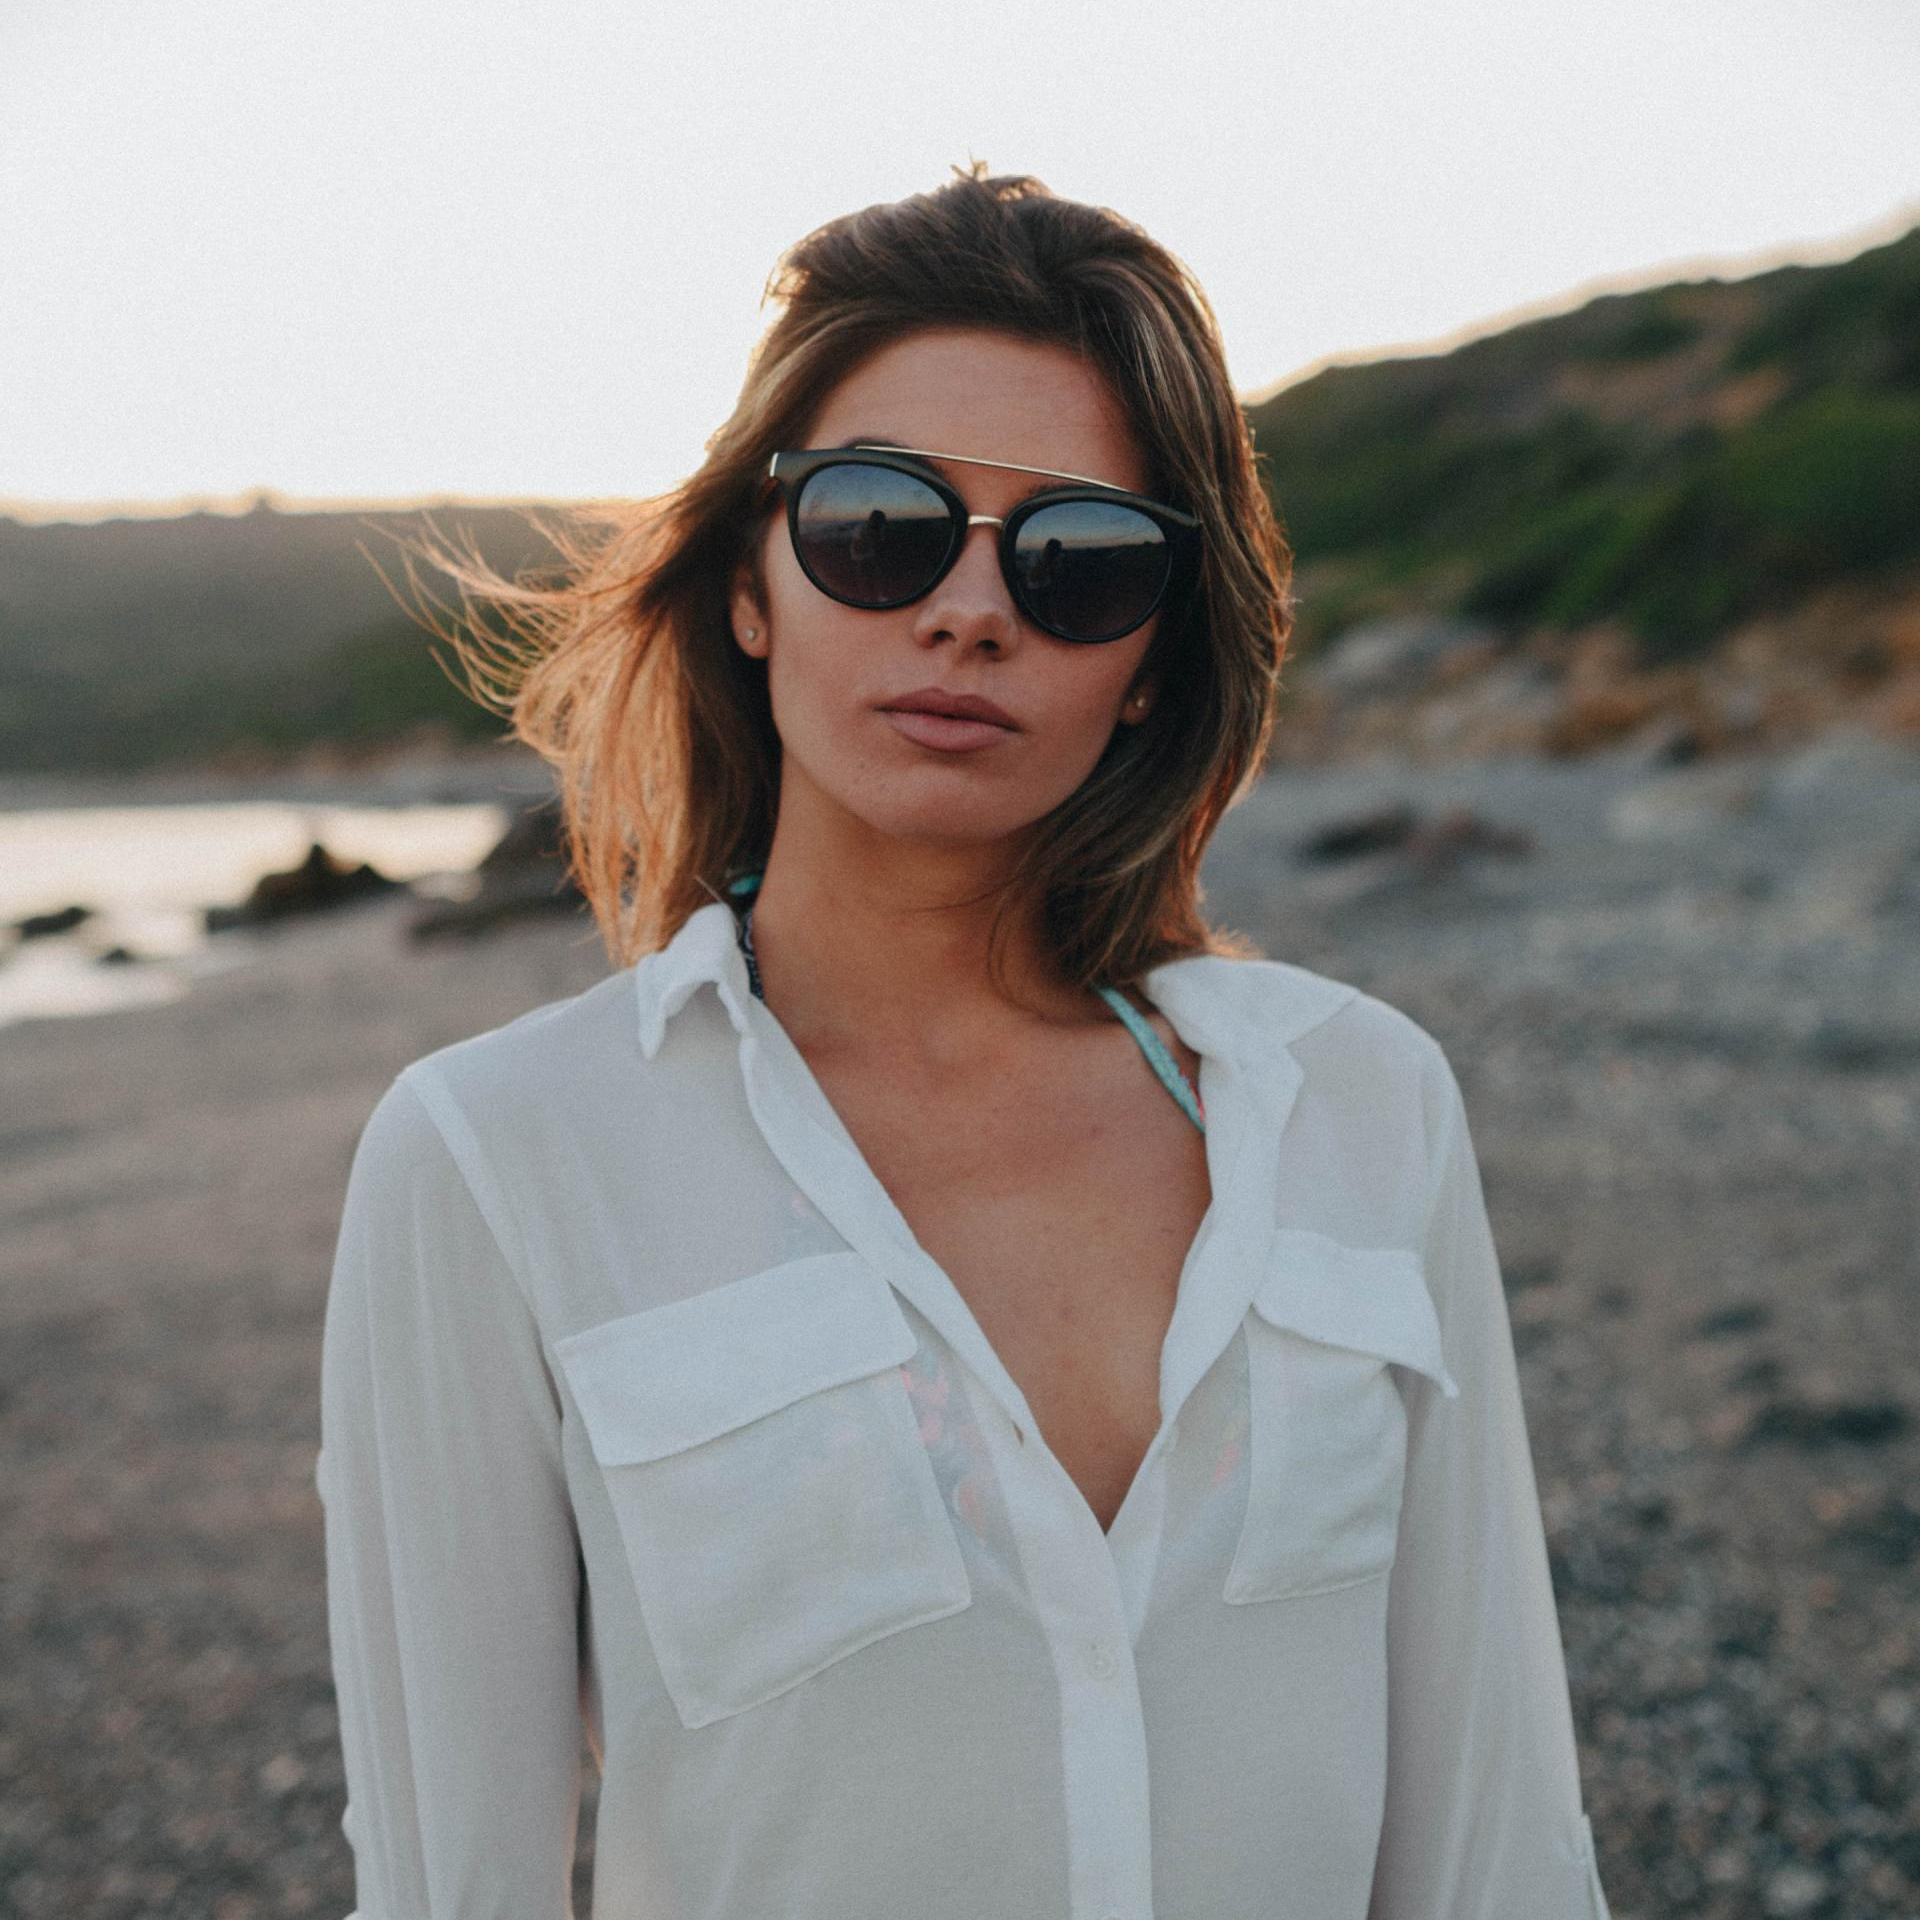 Attractive brunette wearing sunglasses and white shirt at the beach after sunset